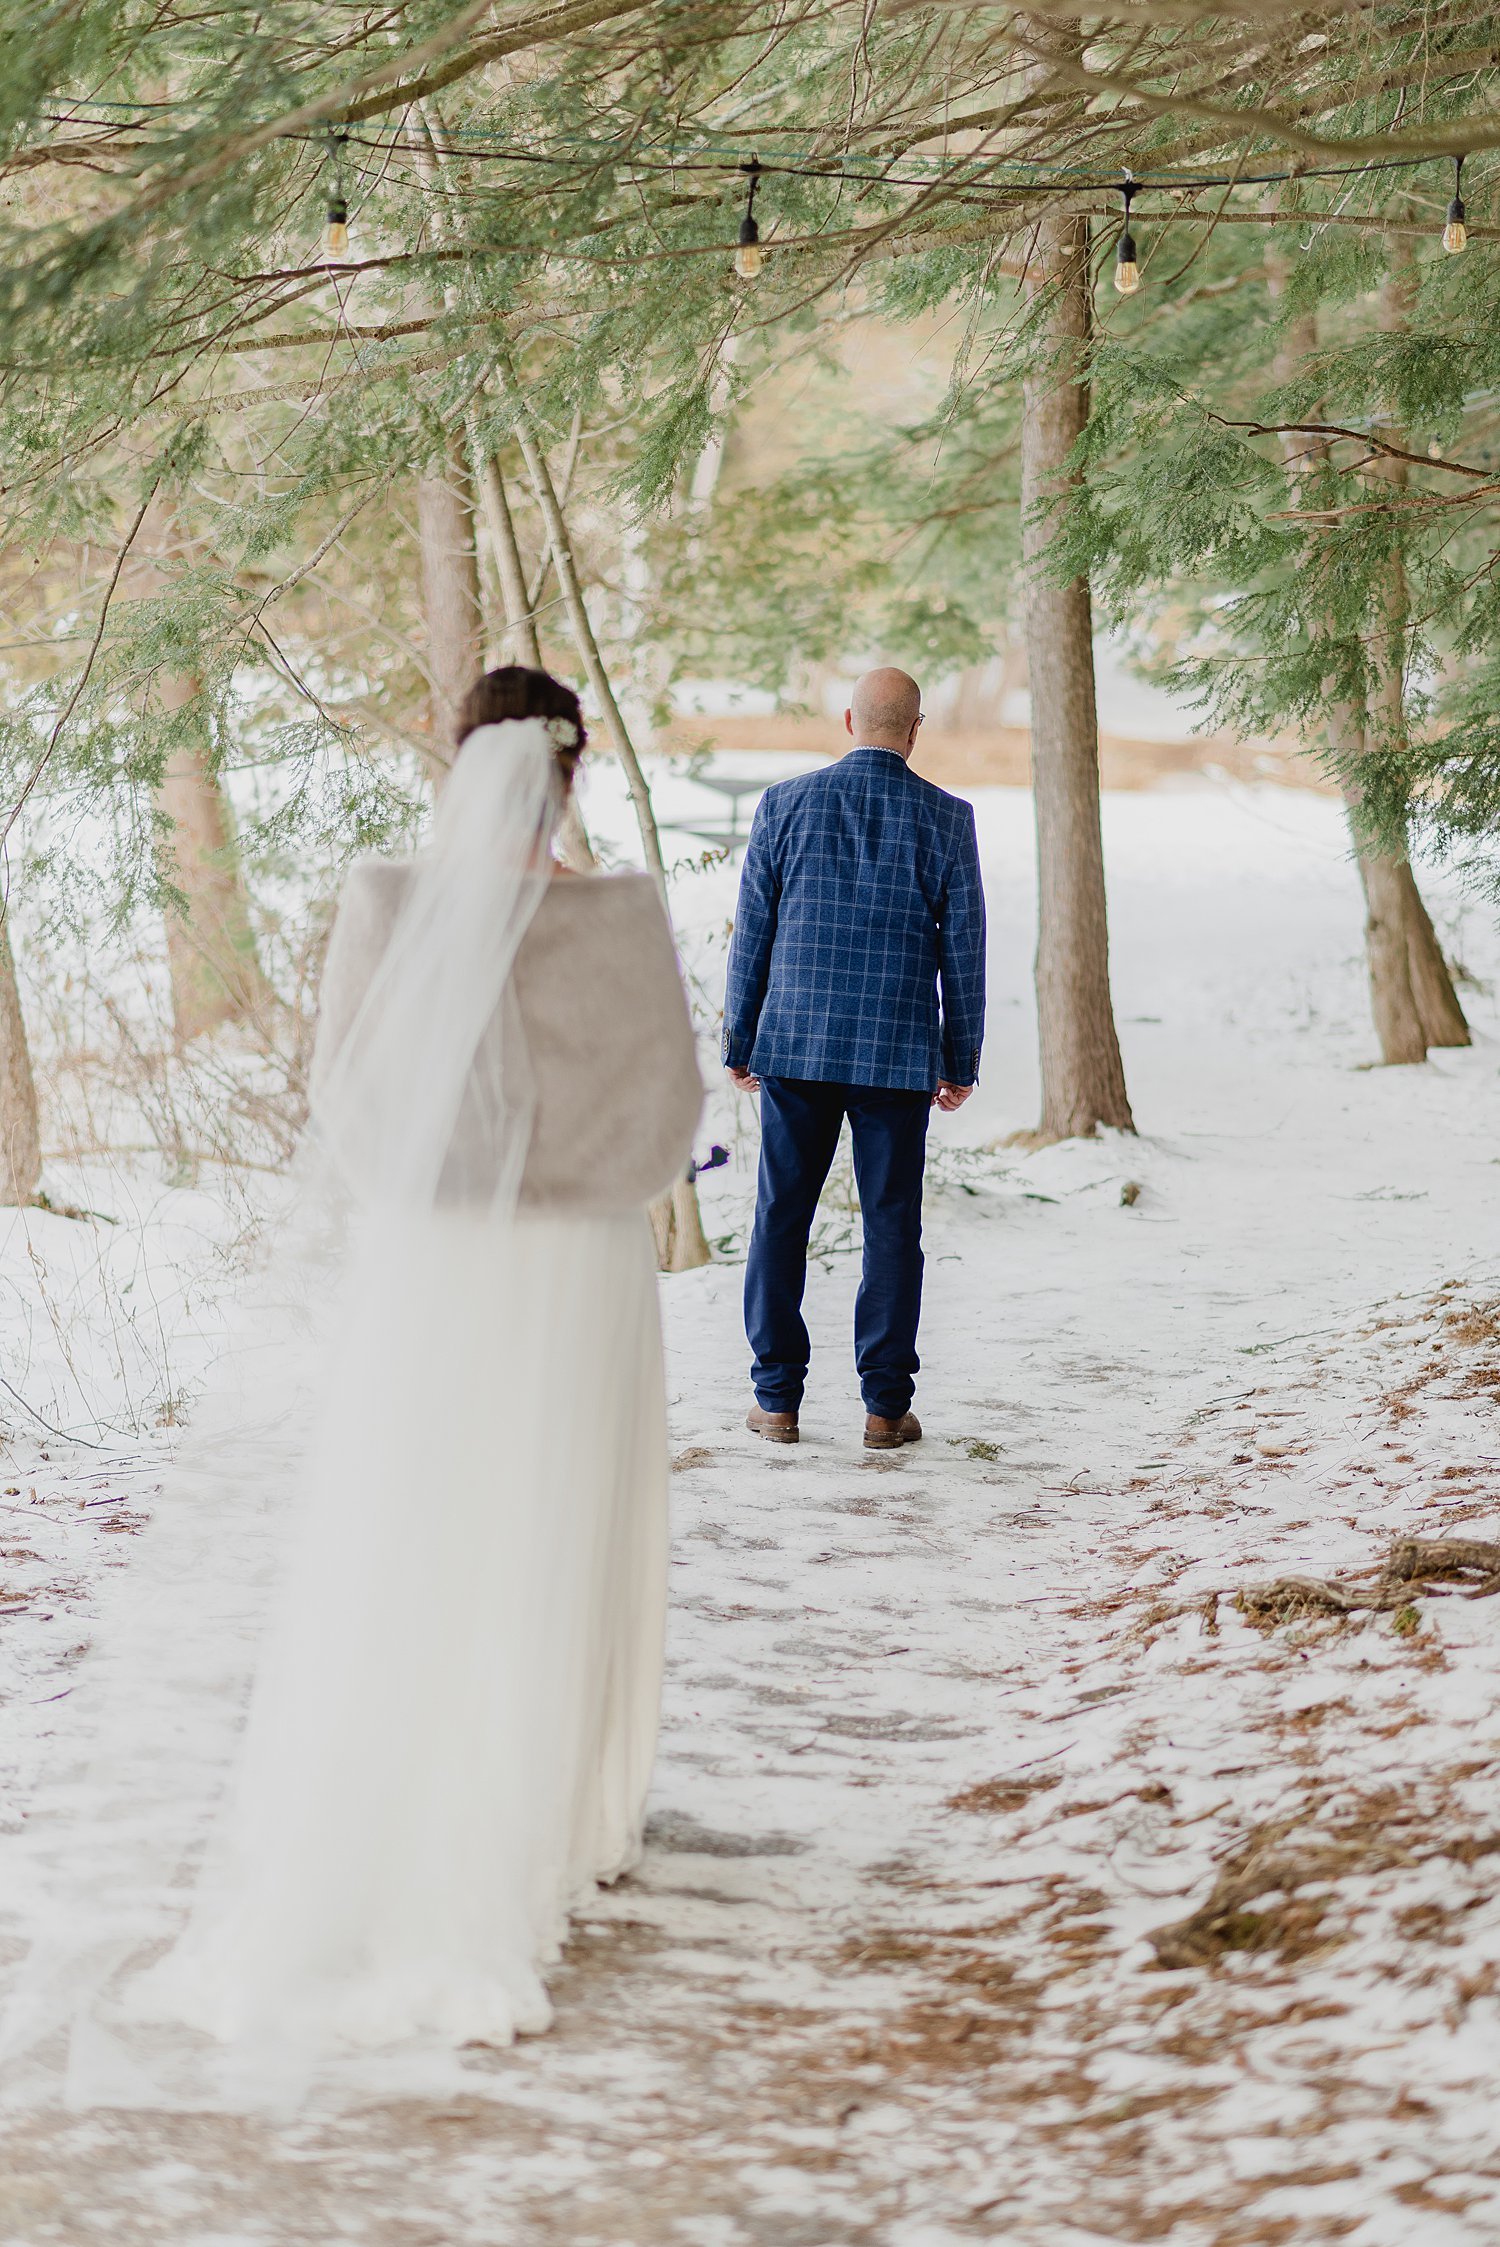 Intimate Winter Elopement at O'Hara Mill Homestead in Madoc, Ontario | Prince Edward County Wedding Photographer | Holly McMurter Photographs_0003.jpg